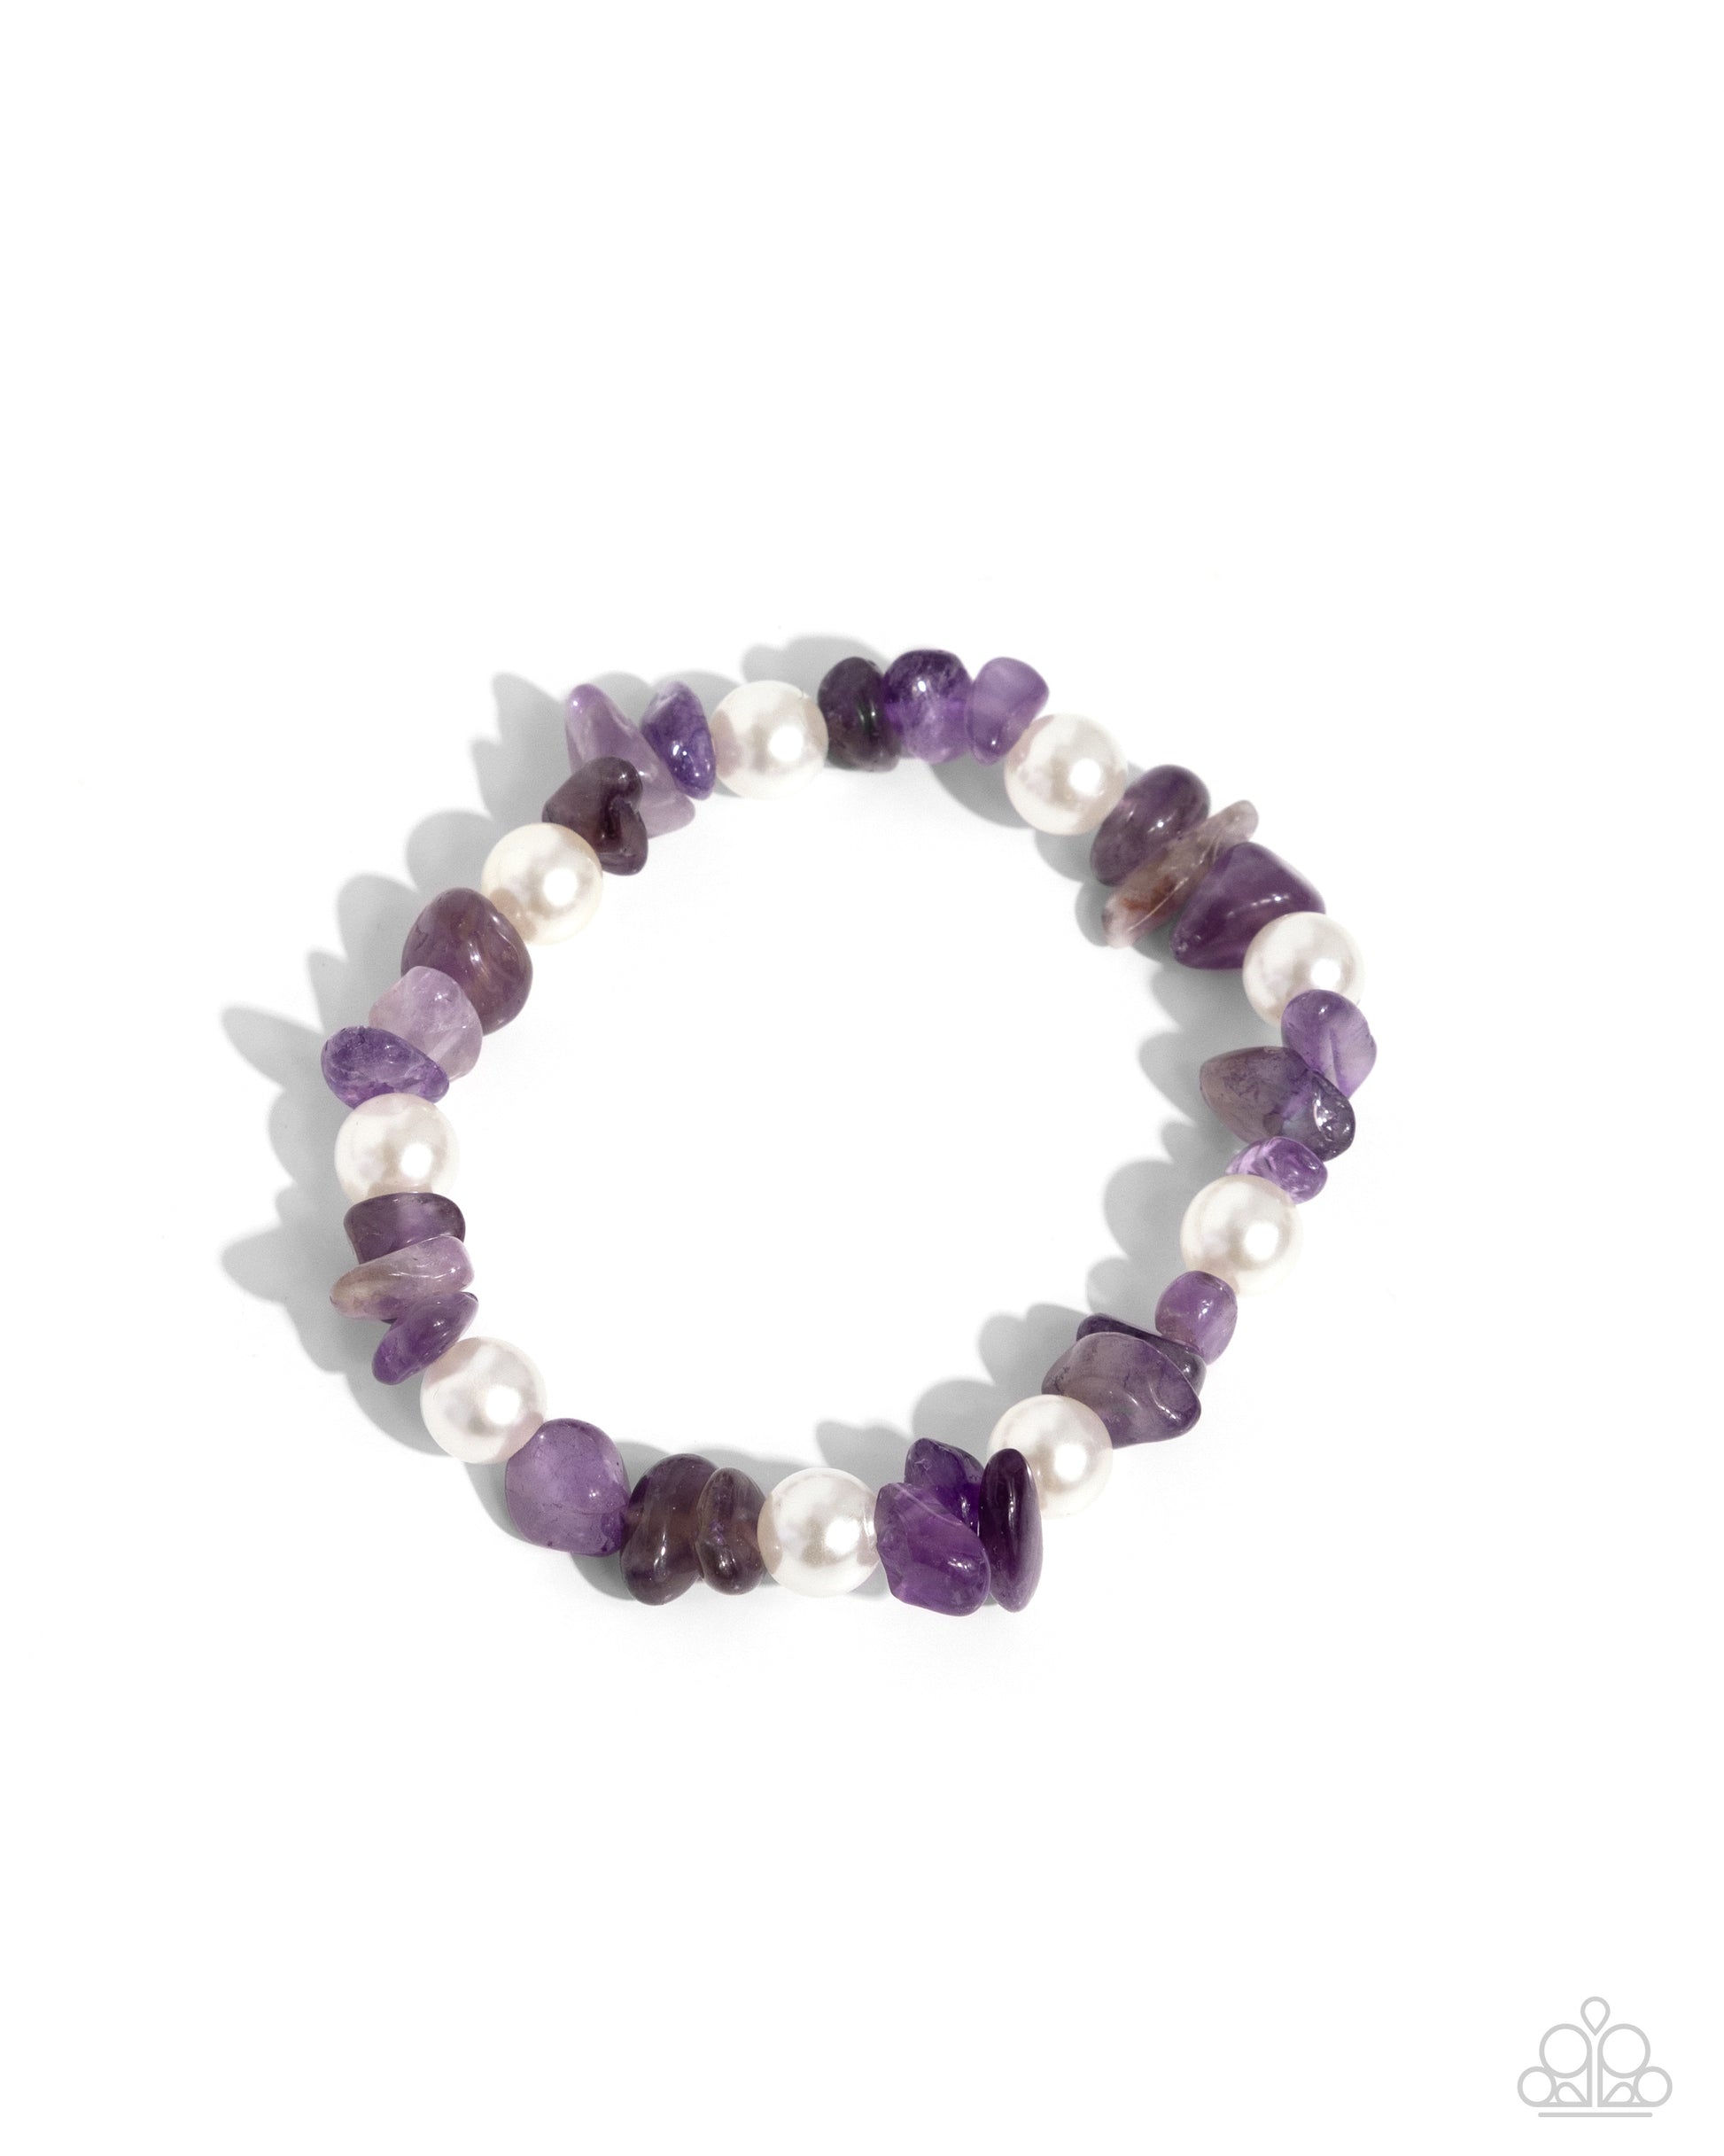 Robust Refinement Purple Stretch Bracelet - Paparazzi Accessories  A collection of amethyst stones and white pearls are infused along an elastic stretchy band for a refined, tranquil statement. As the stone elements in this piece are natural, some color variation is normal.  Sold as one individual bracelet.  SKU: P9SE-PRXX-204WV   Get The Complete Look! Necklace: "Nostalgically Noble - Purple" (Sold Separately)